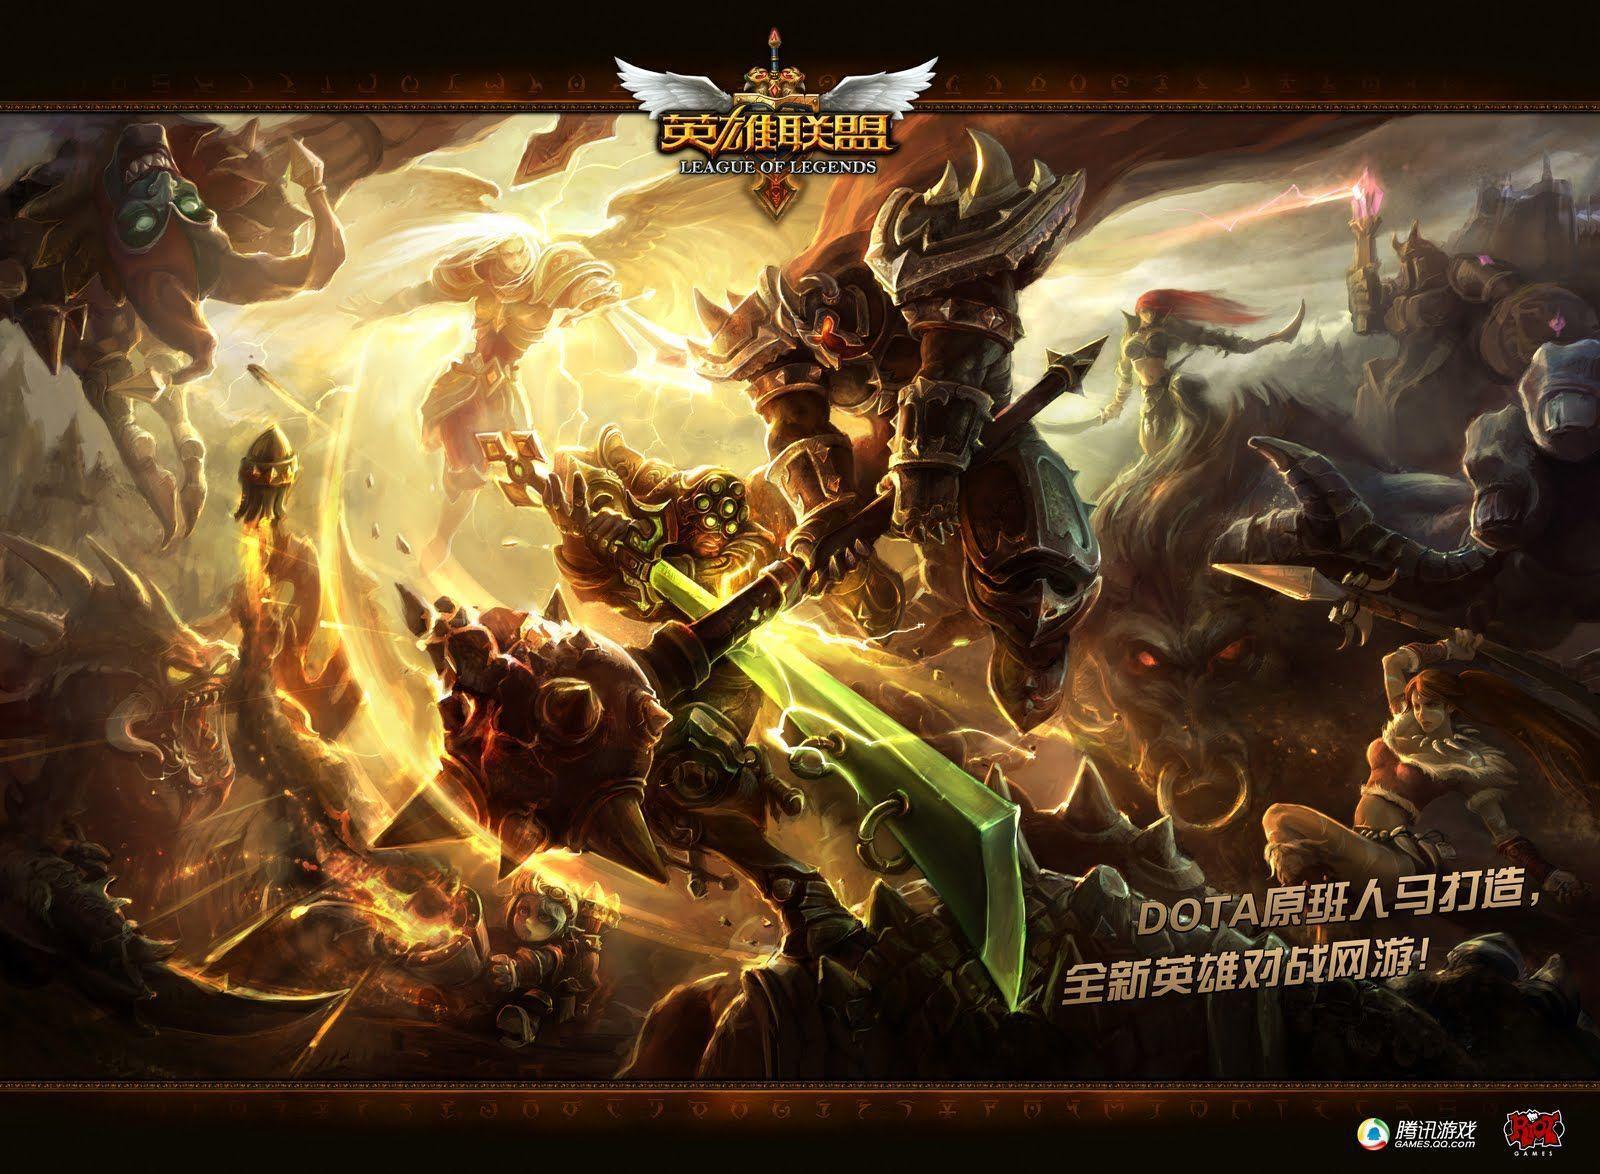 Chinese Dota League of Legends Background Wallpaper